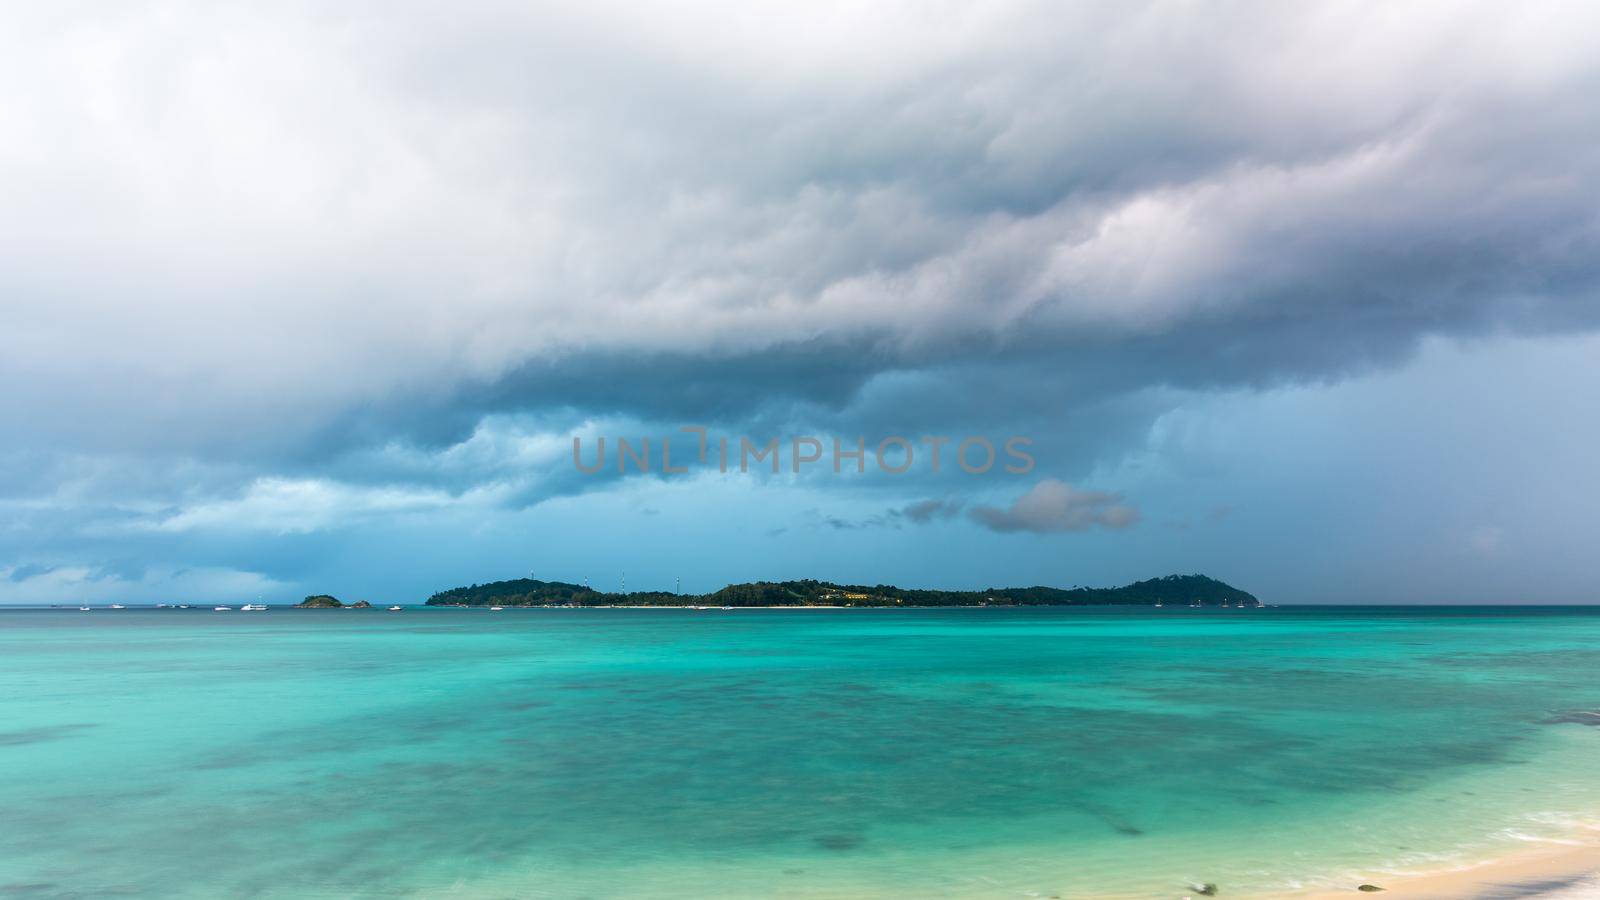 Climate change with storm clouds and rain over Koh Lipe island and the green waters of the Andaman Sea, is a famous attractions of Tarutao National Park, Satun, Thailand, 16:9 widescreen